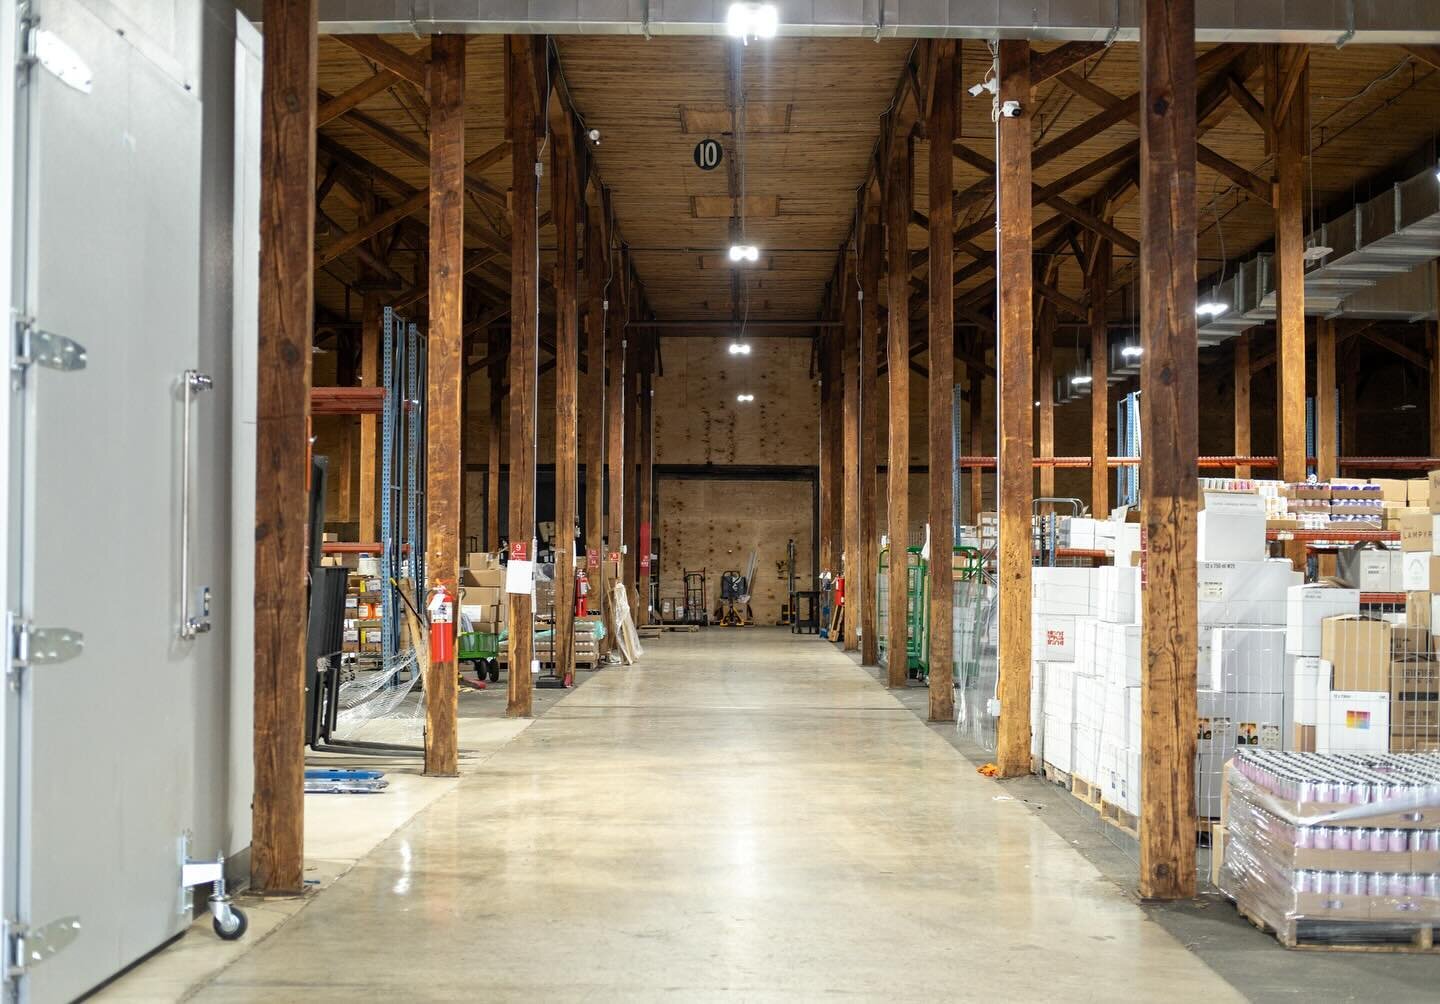 #HatchLogistics provides small to mid-sized businesses space for strategic storage &amp; co-warehousing, centrally located on the East Coast and conveniently close to major highways. We&rsquo;d love to see if our space is a match for your needs!

Sho